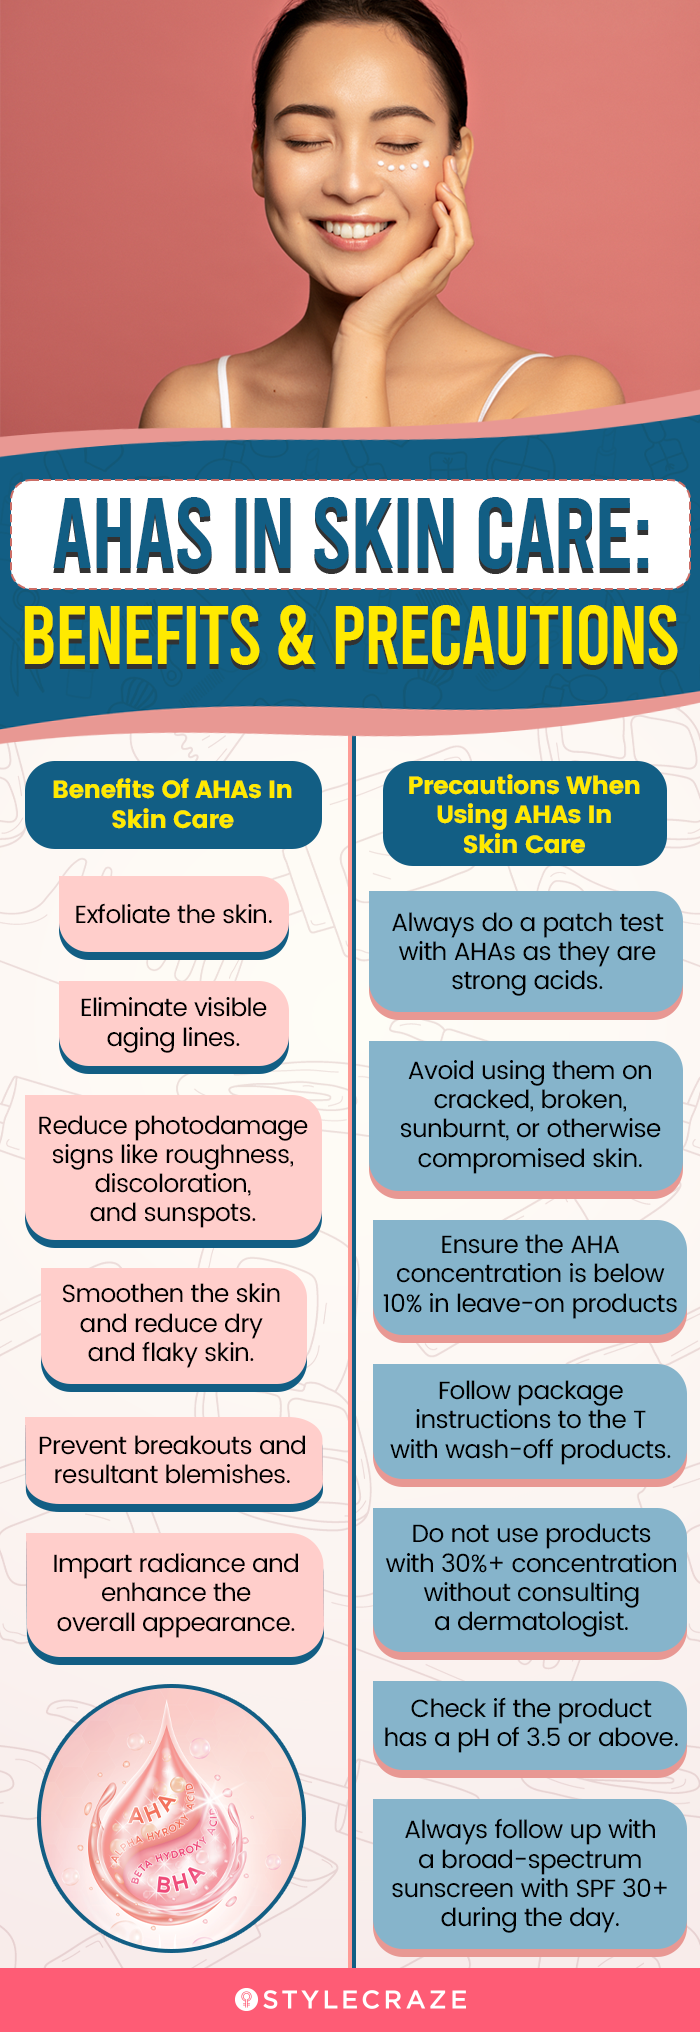 AHAs In Skin Care: Benefits & Precautions (infographic)